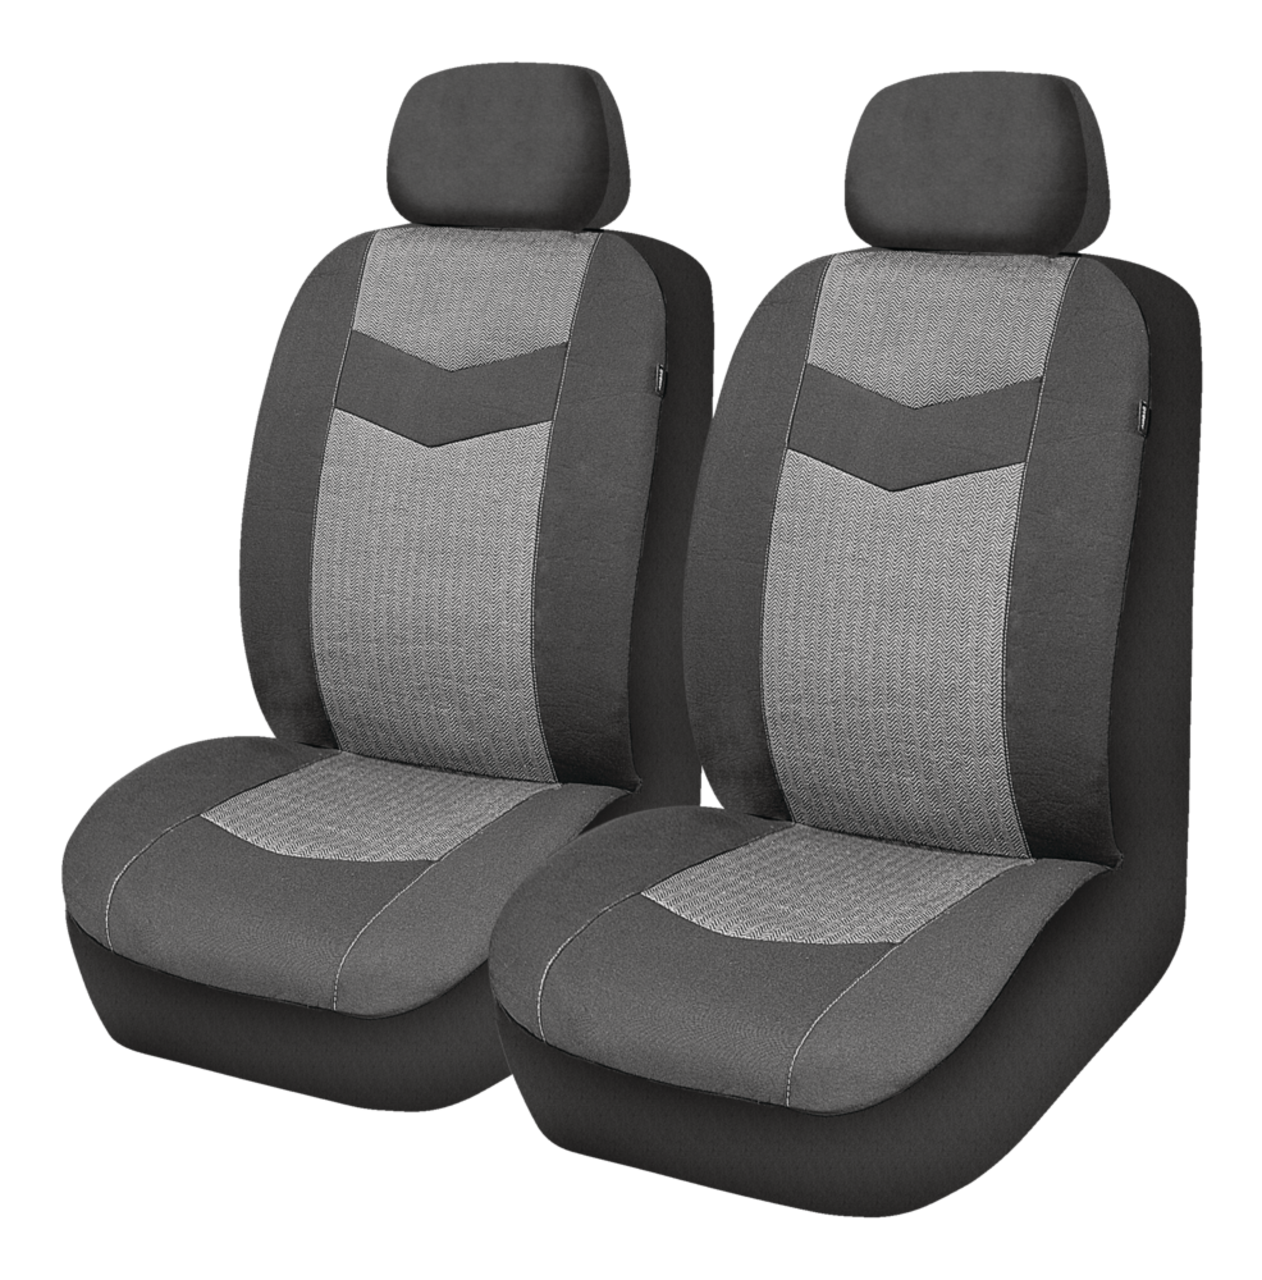 https://media-www.canadiantire.ca/product/automotive/car-care-accessories/auto-comfort/0326010/autotrends-core-better-seat-cover-black-b1fc8993-e927-451e-90dc-81de75d33b22.png?imdensity=1&imwidth=640&impolicy=mZoom